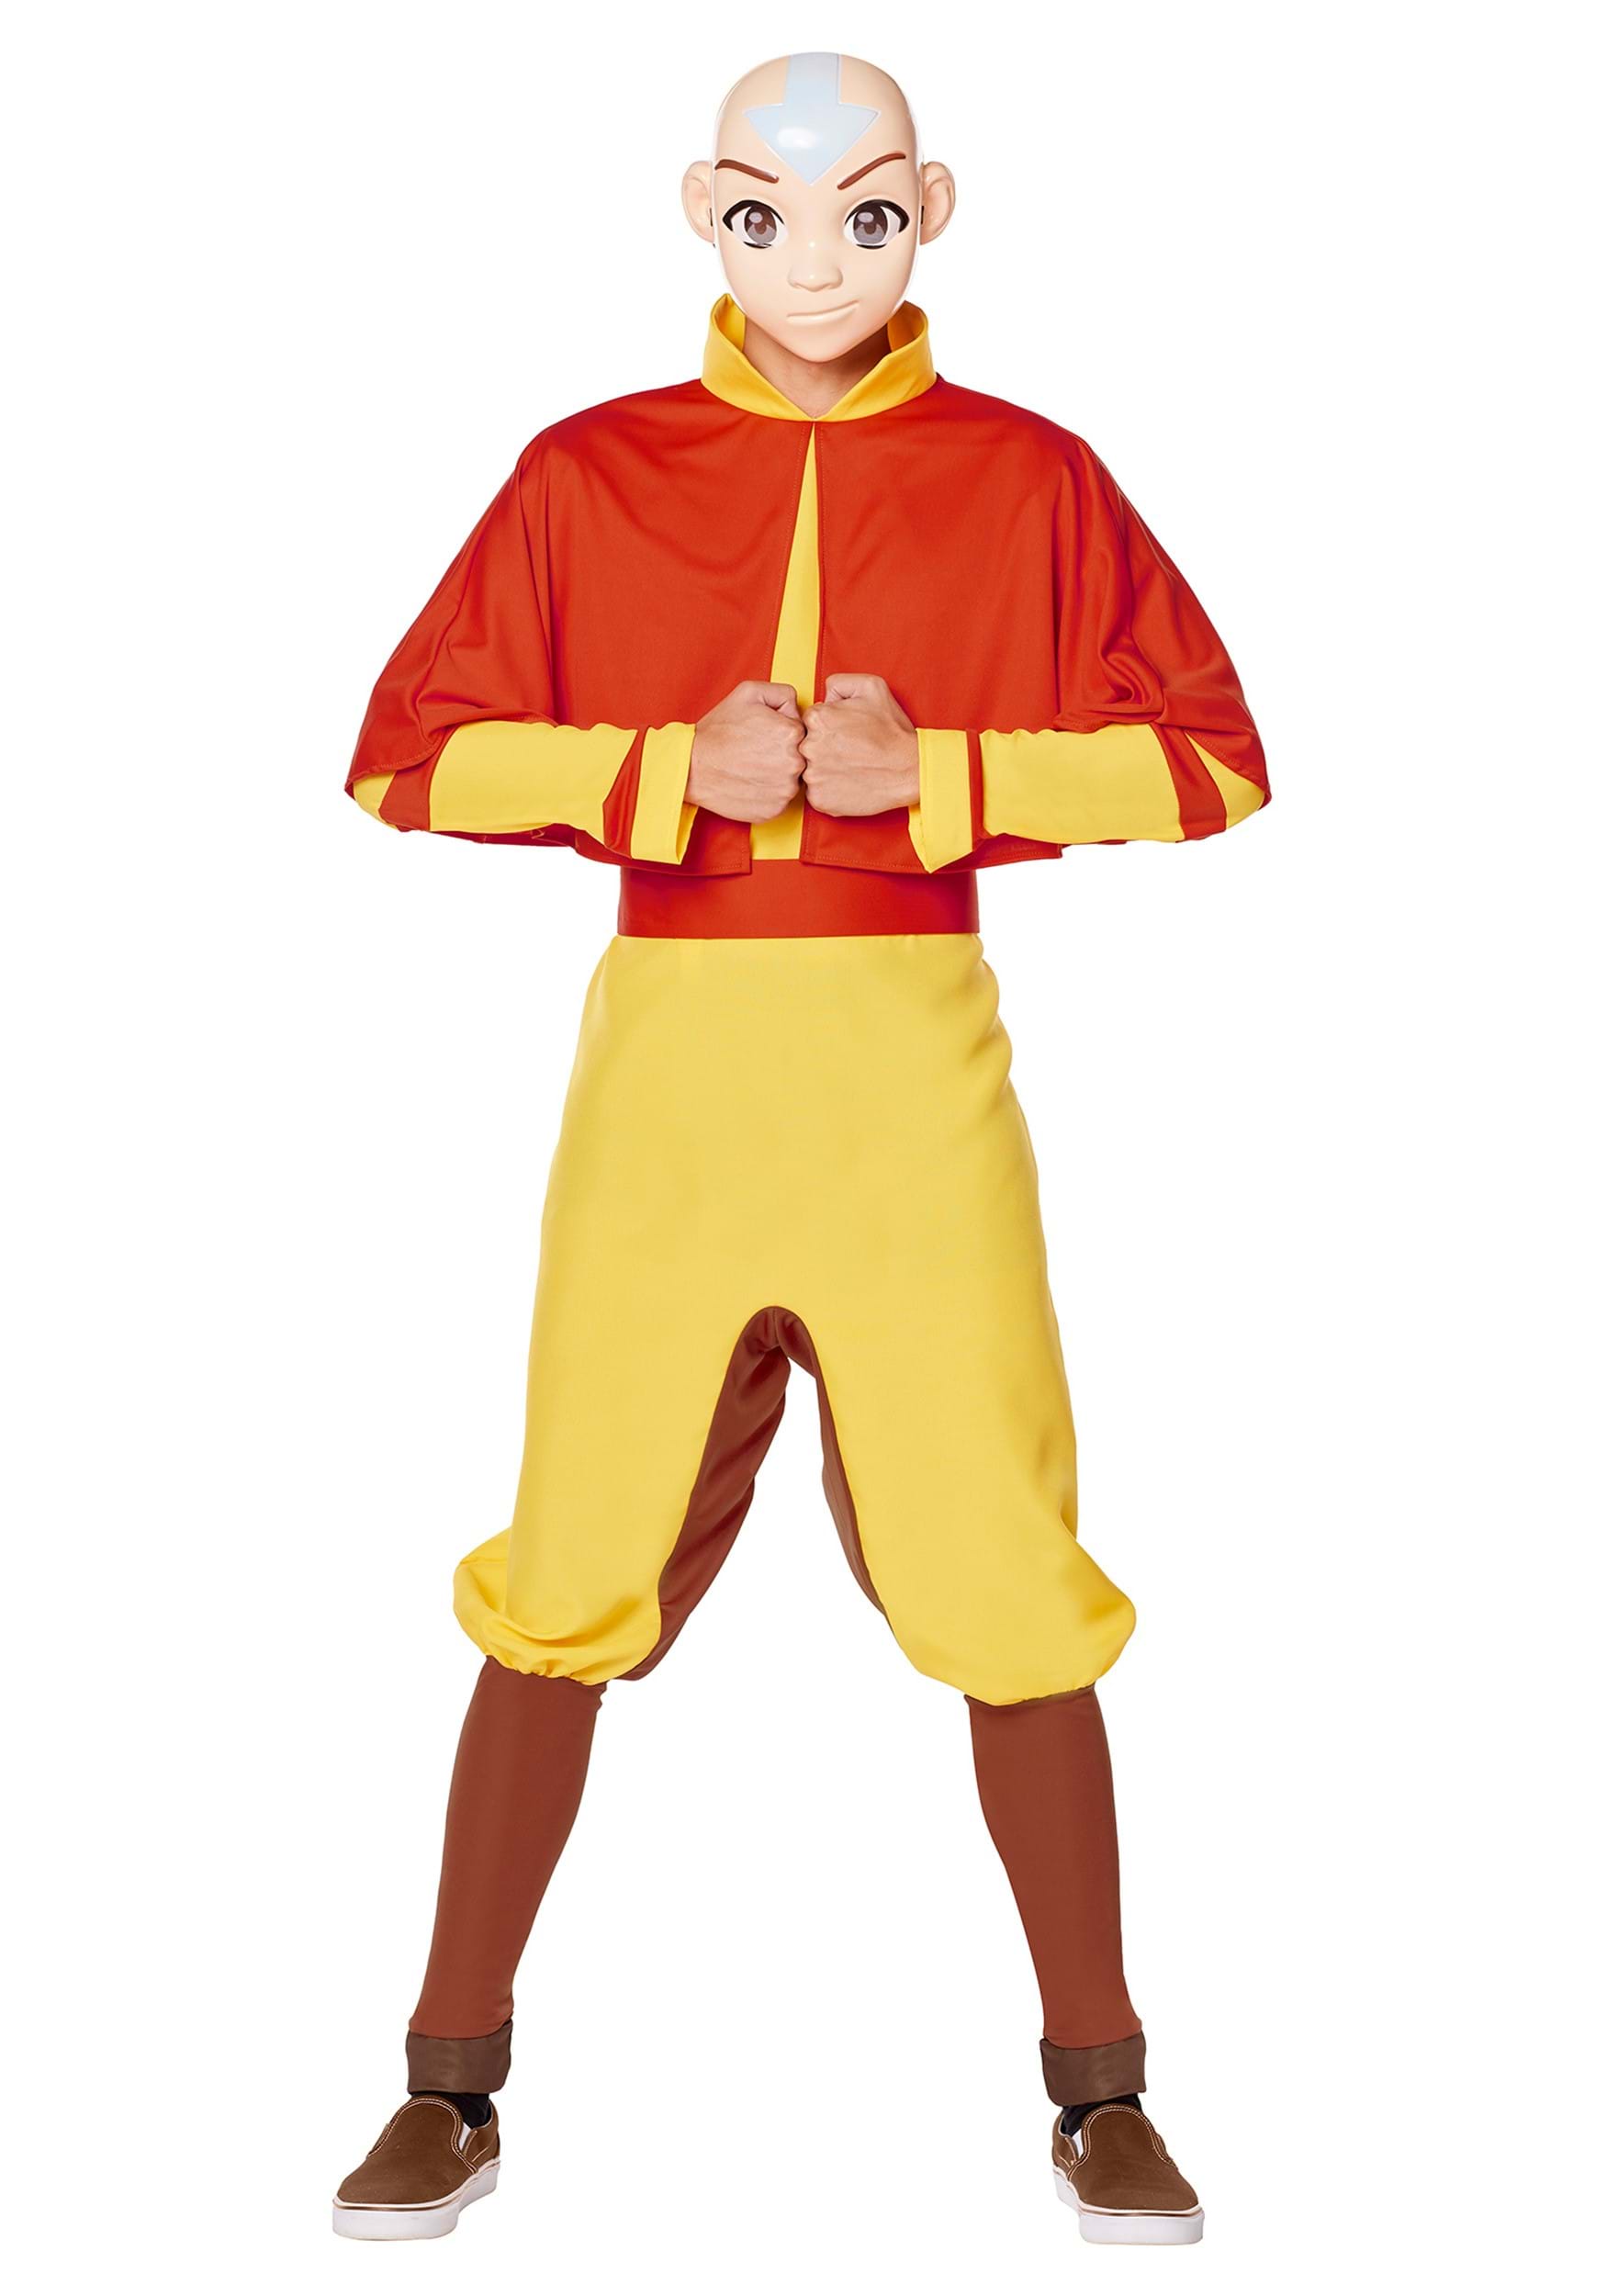 Avatar The Last Airbender- Aang Child Costume